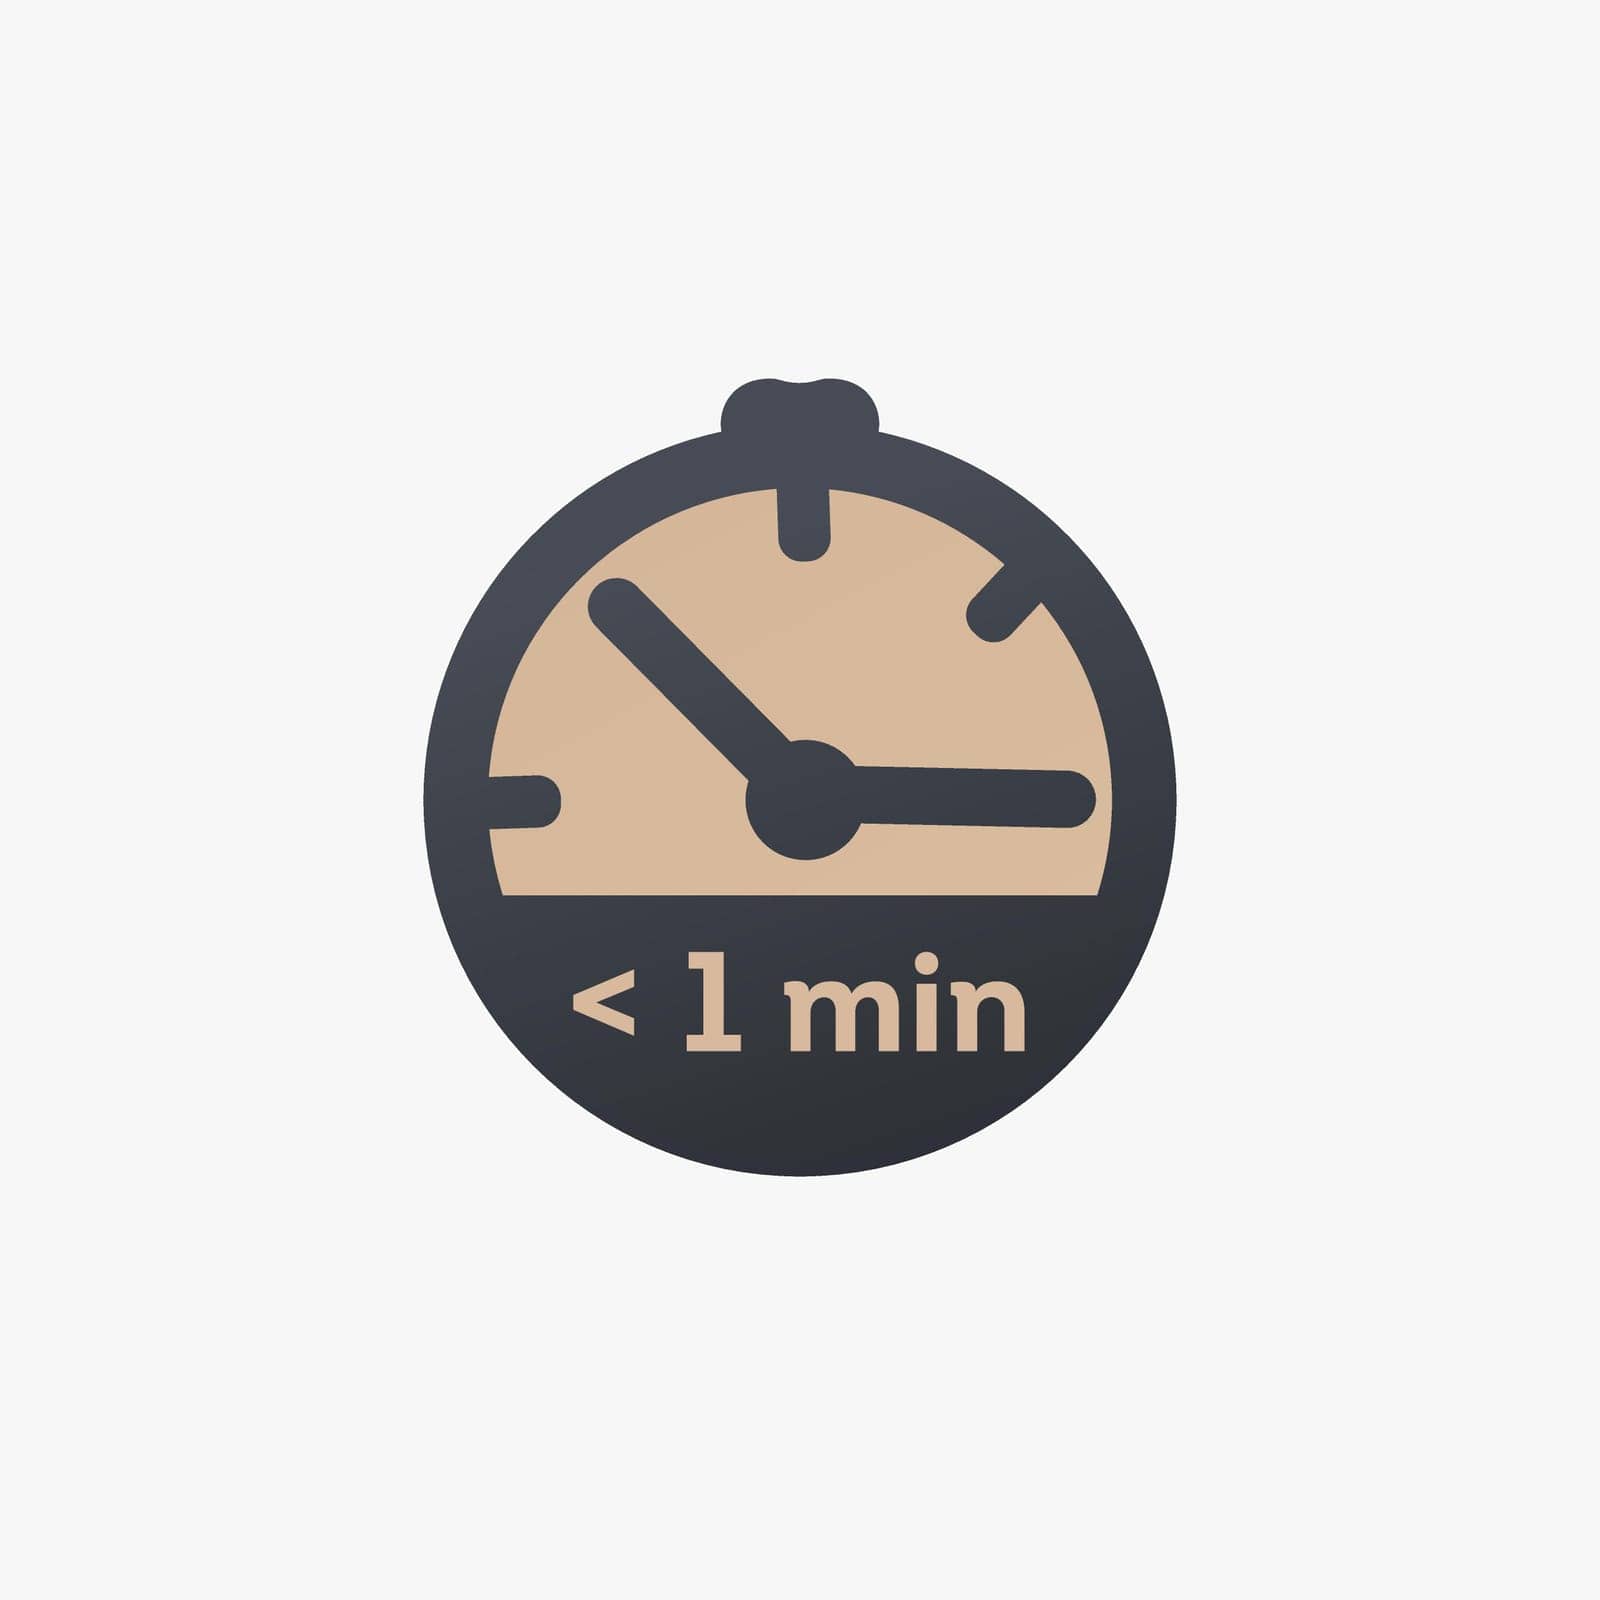 Less then one minute left. Extra second, extra time icon. Timer countdown. Stock vector illustration isolated on white background. by Kyrylov